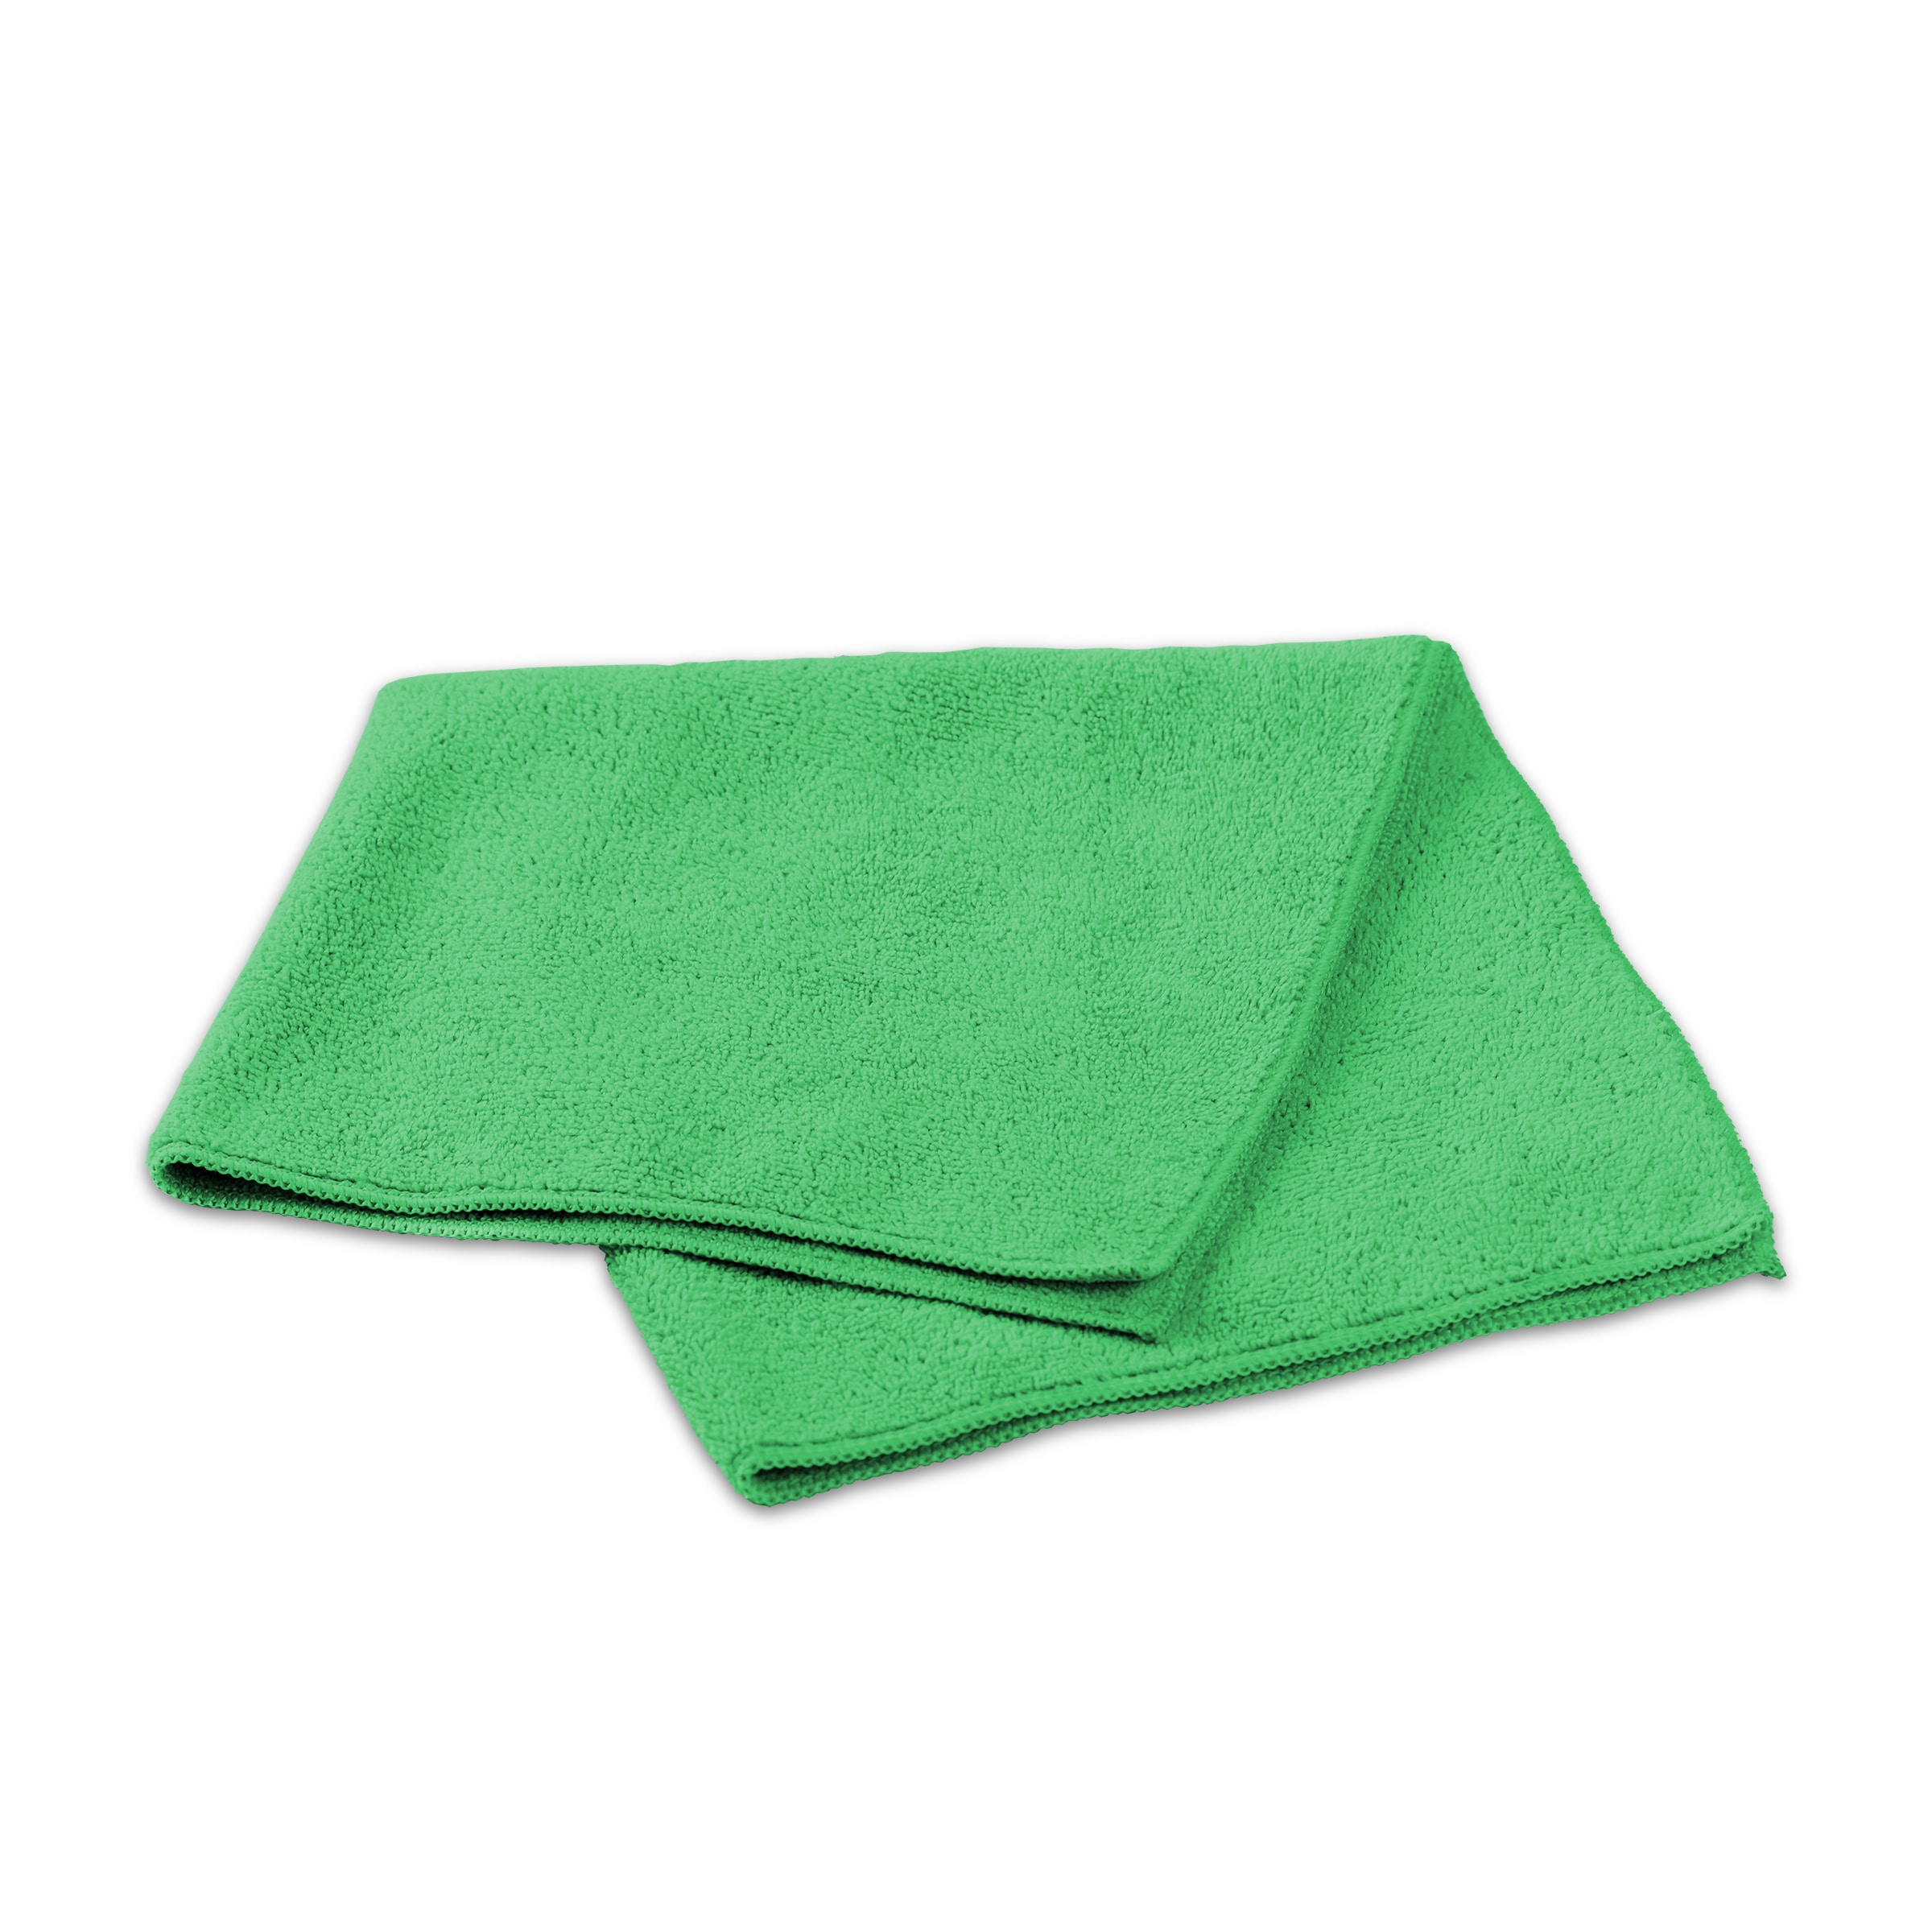 AUsagg 1 Pcs Green Microfiber Car Cleaning Towels Soft Microfiber Cloths  For Washing Cleaning Dust W7f5 Tool For Home Kitchen X2B5